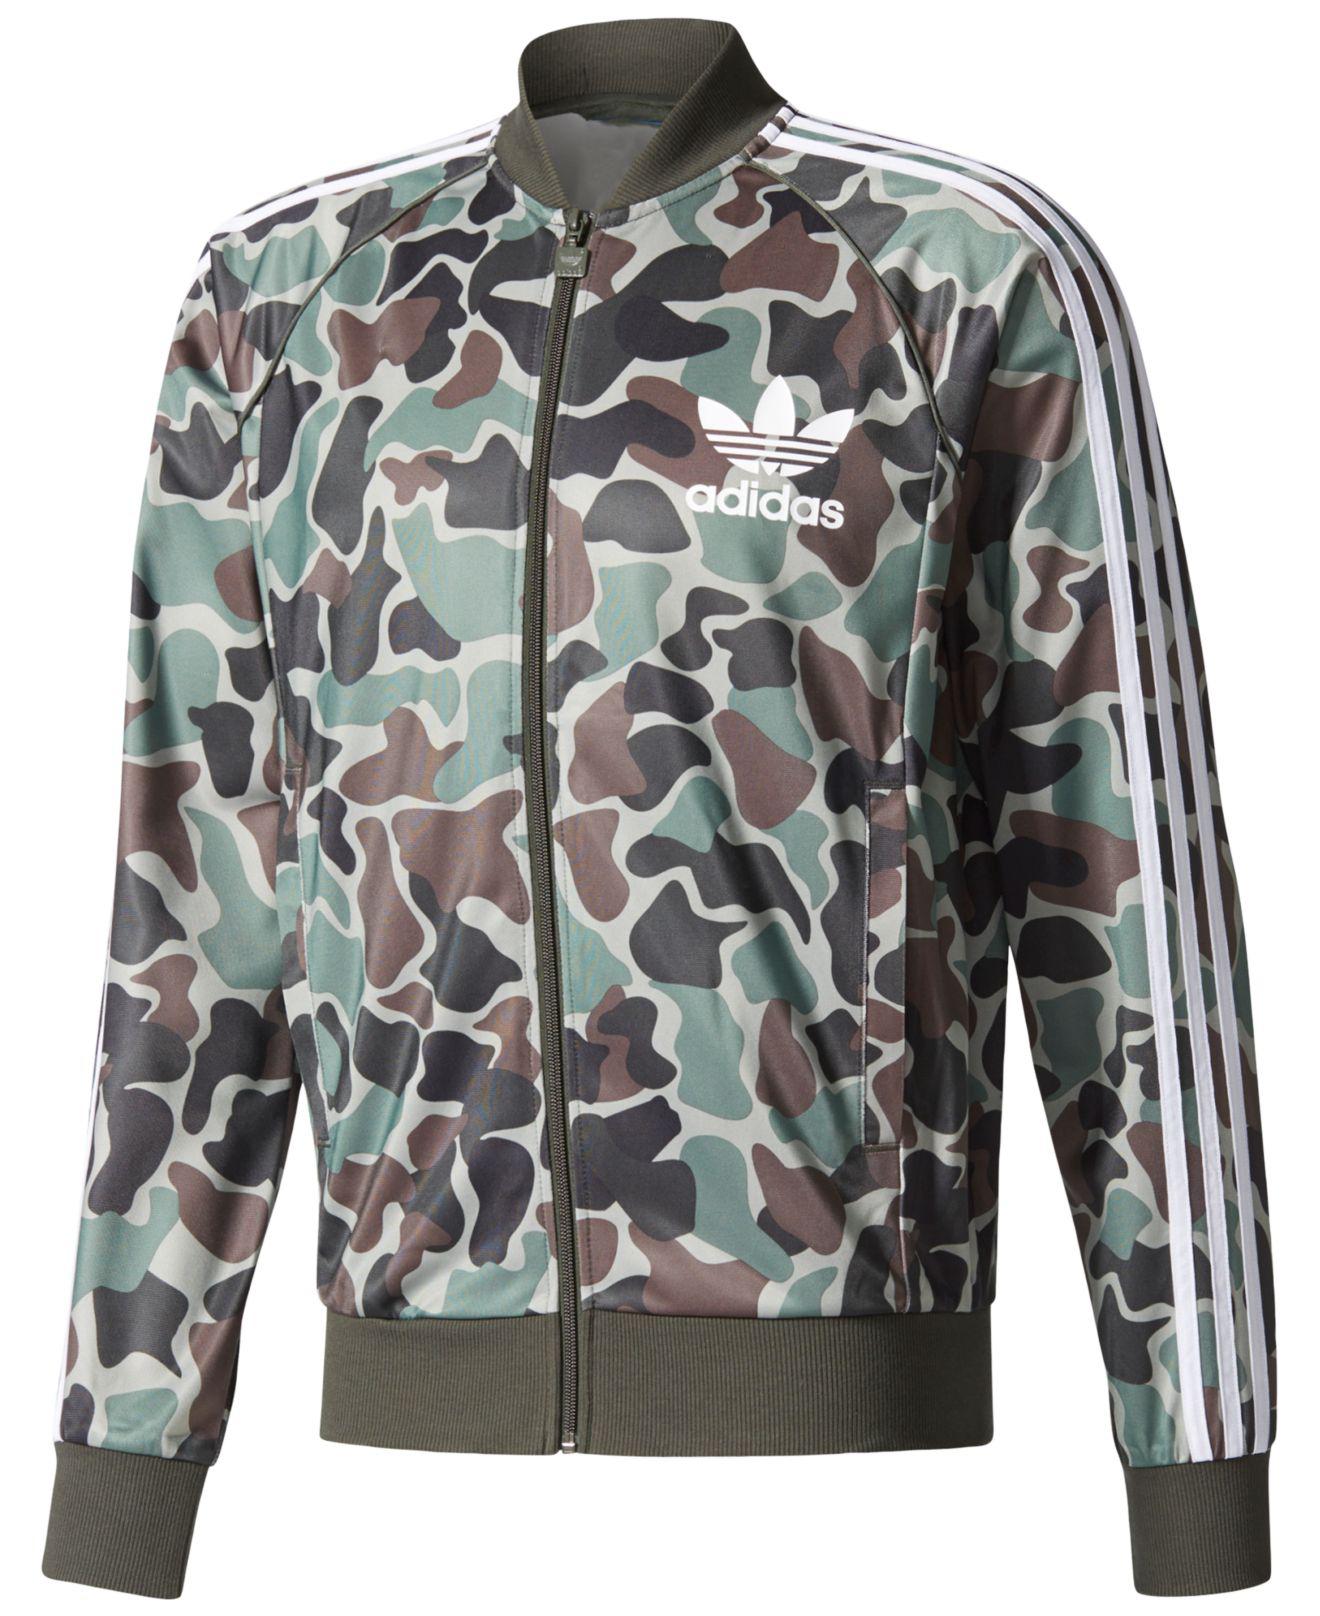 adidas Synthetic Originals Camouflage Superstar Track Jacket for Men - Lyst